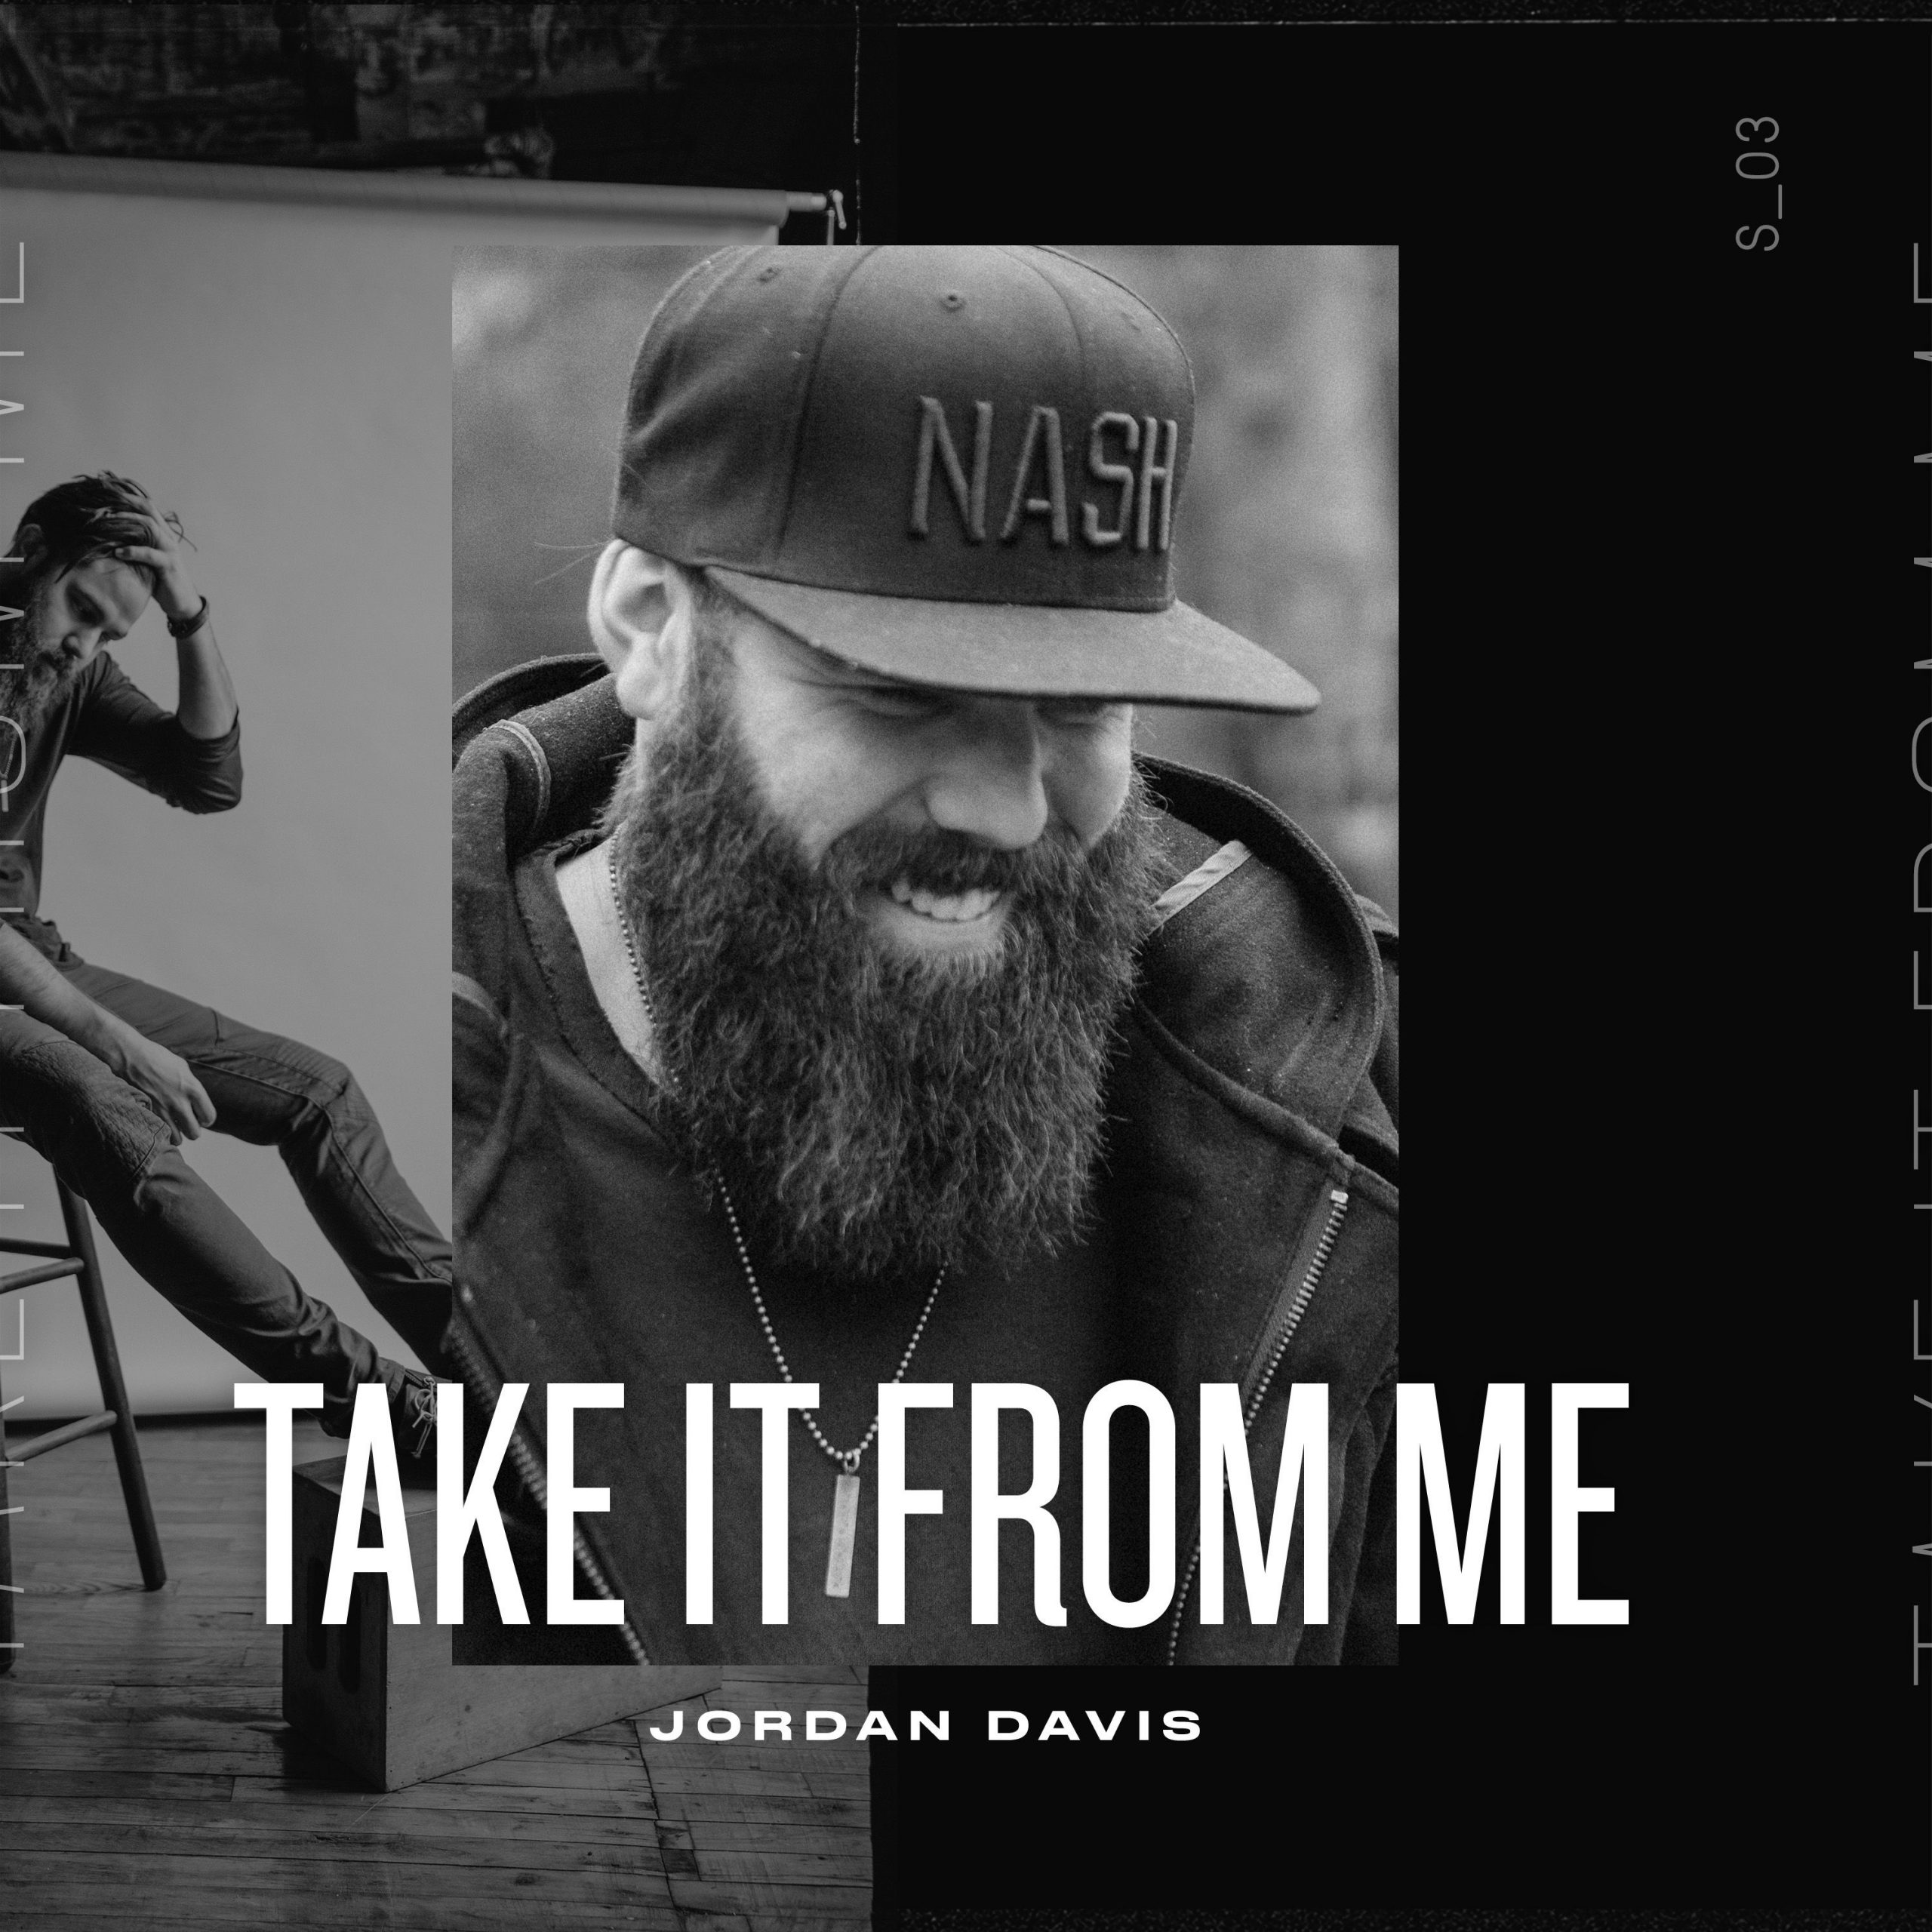 JORDAN DAVIS NO.1 MOST ADDED AT COUNTRY RADIO WITH NEW SINGLE “TAKE IT